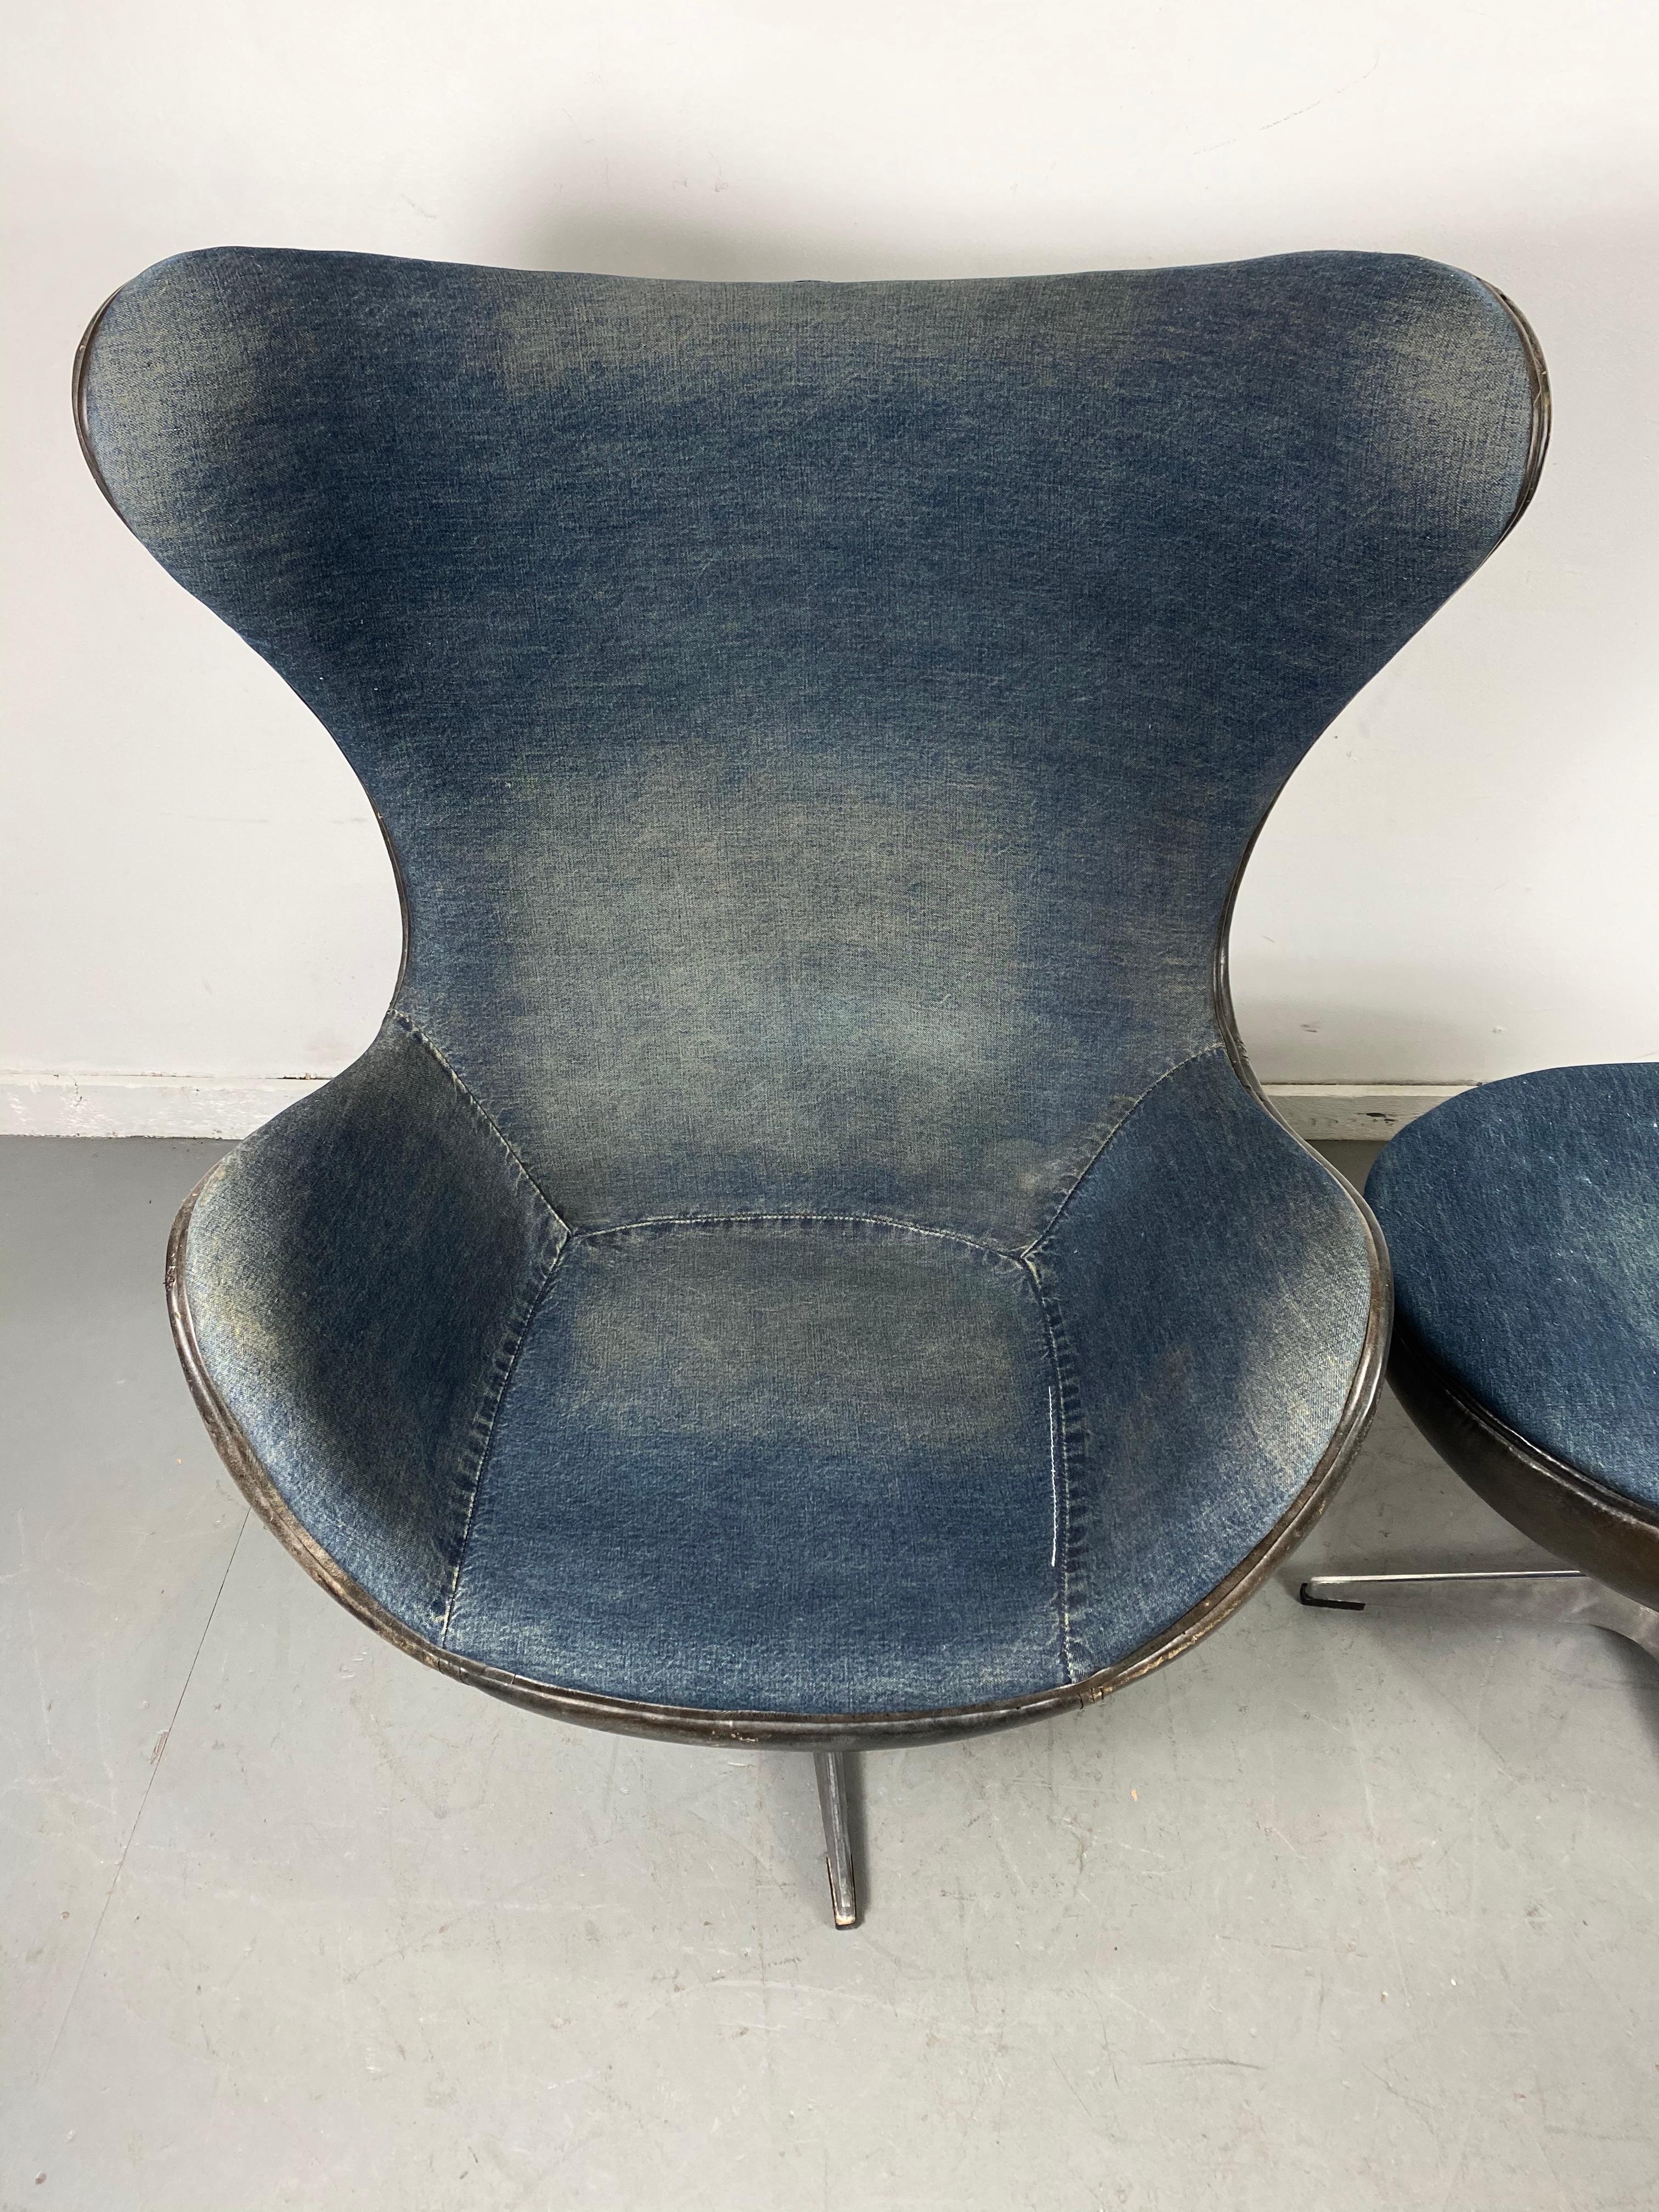 American Classic Egg Chair and Ottoman, Black Leather and Denim, After Arne Jacobsen